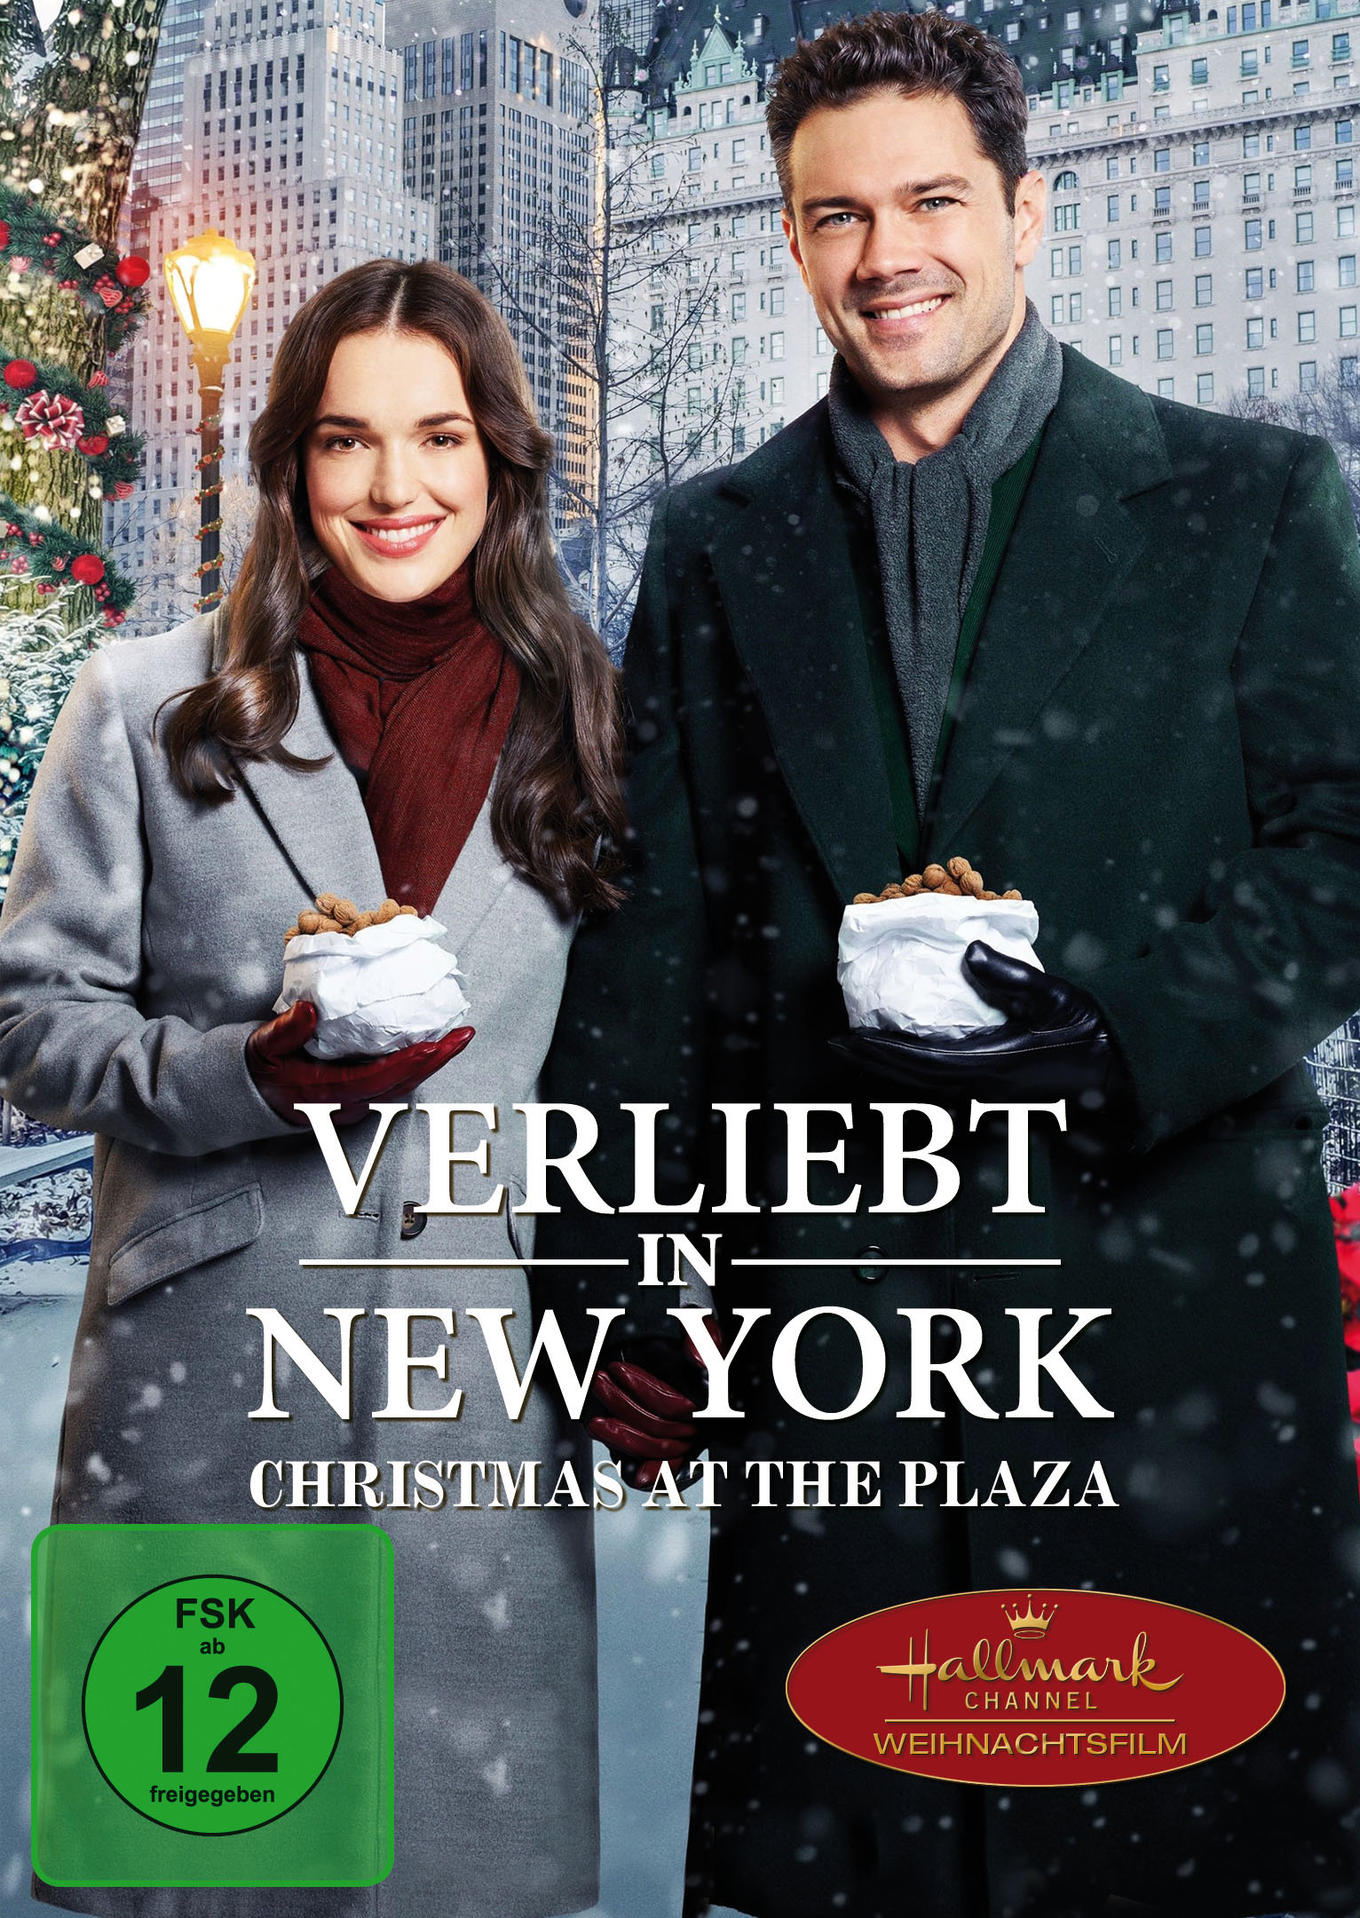 DVD New Verliebt - at Plaza Christmas the York in